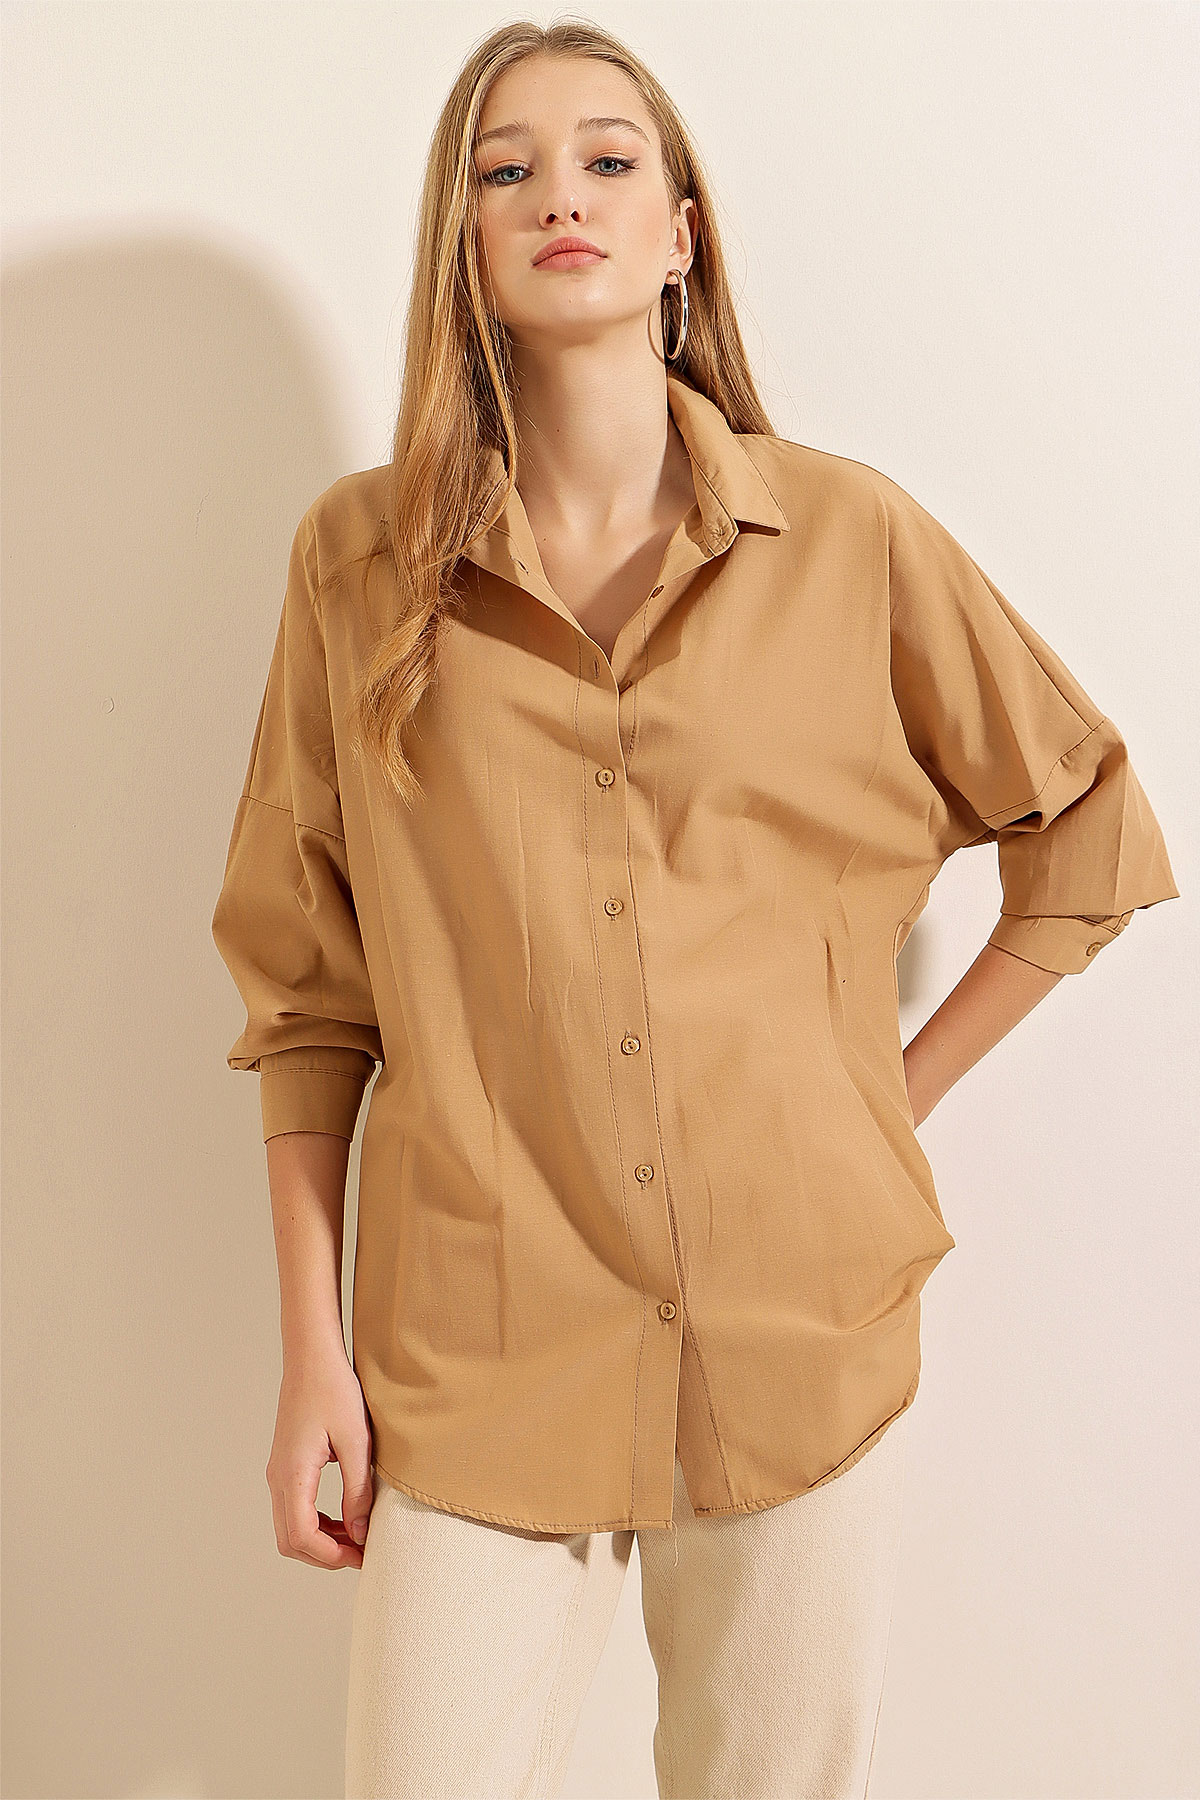 A model wears 46636 - Shirt - Biscuit Color, wholesale Shirt of Bigdart to display at Lonca